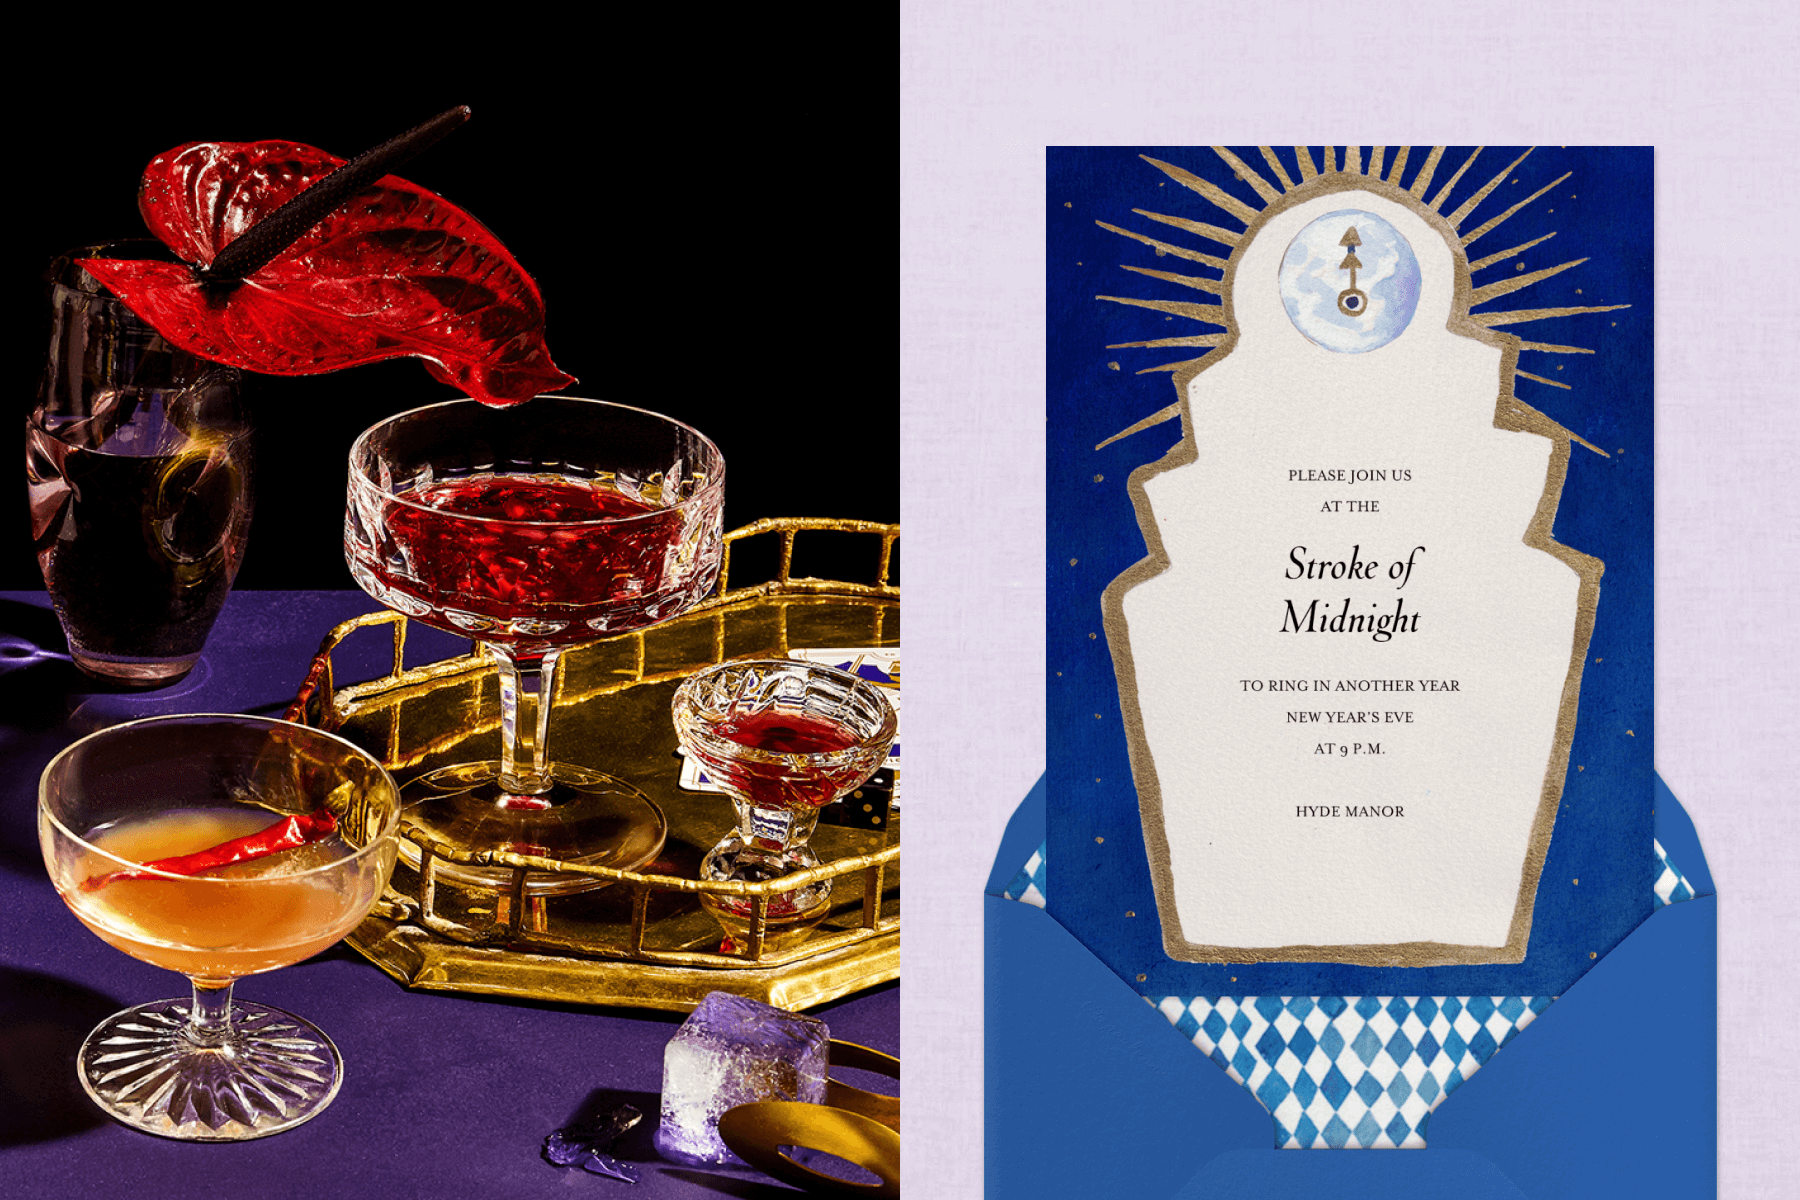 A moody photo of drinks in coupe glasses on a gold tray android Anthurium flower; a blue invitation with an abstract grandfather clock shape striking midnight.